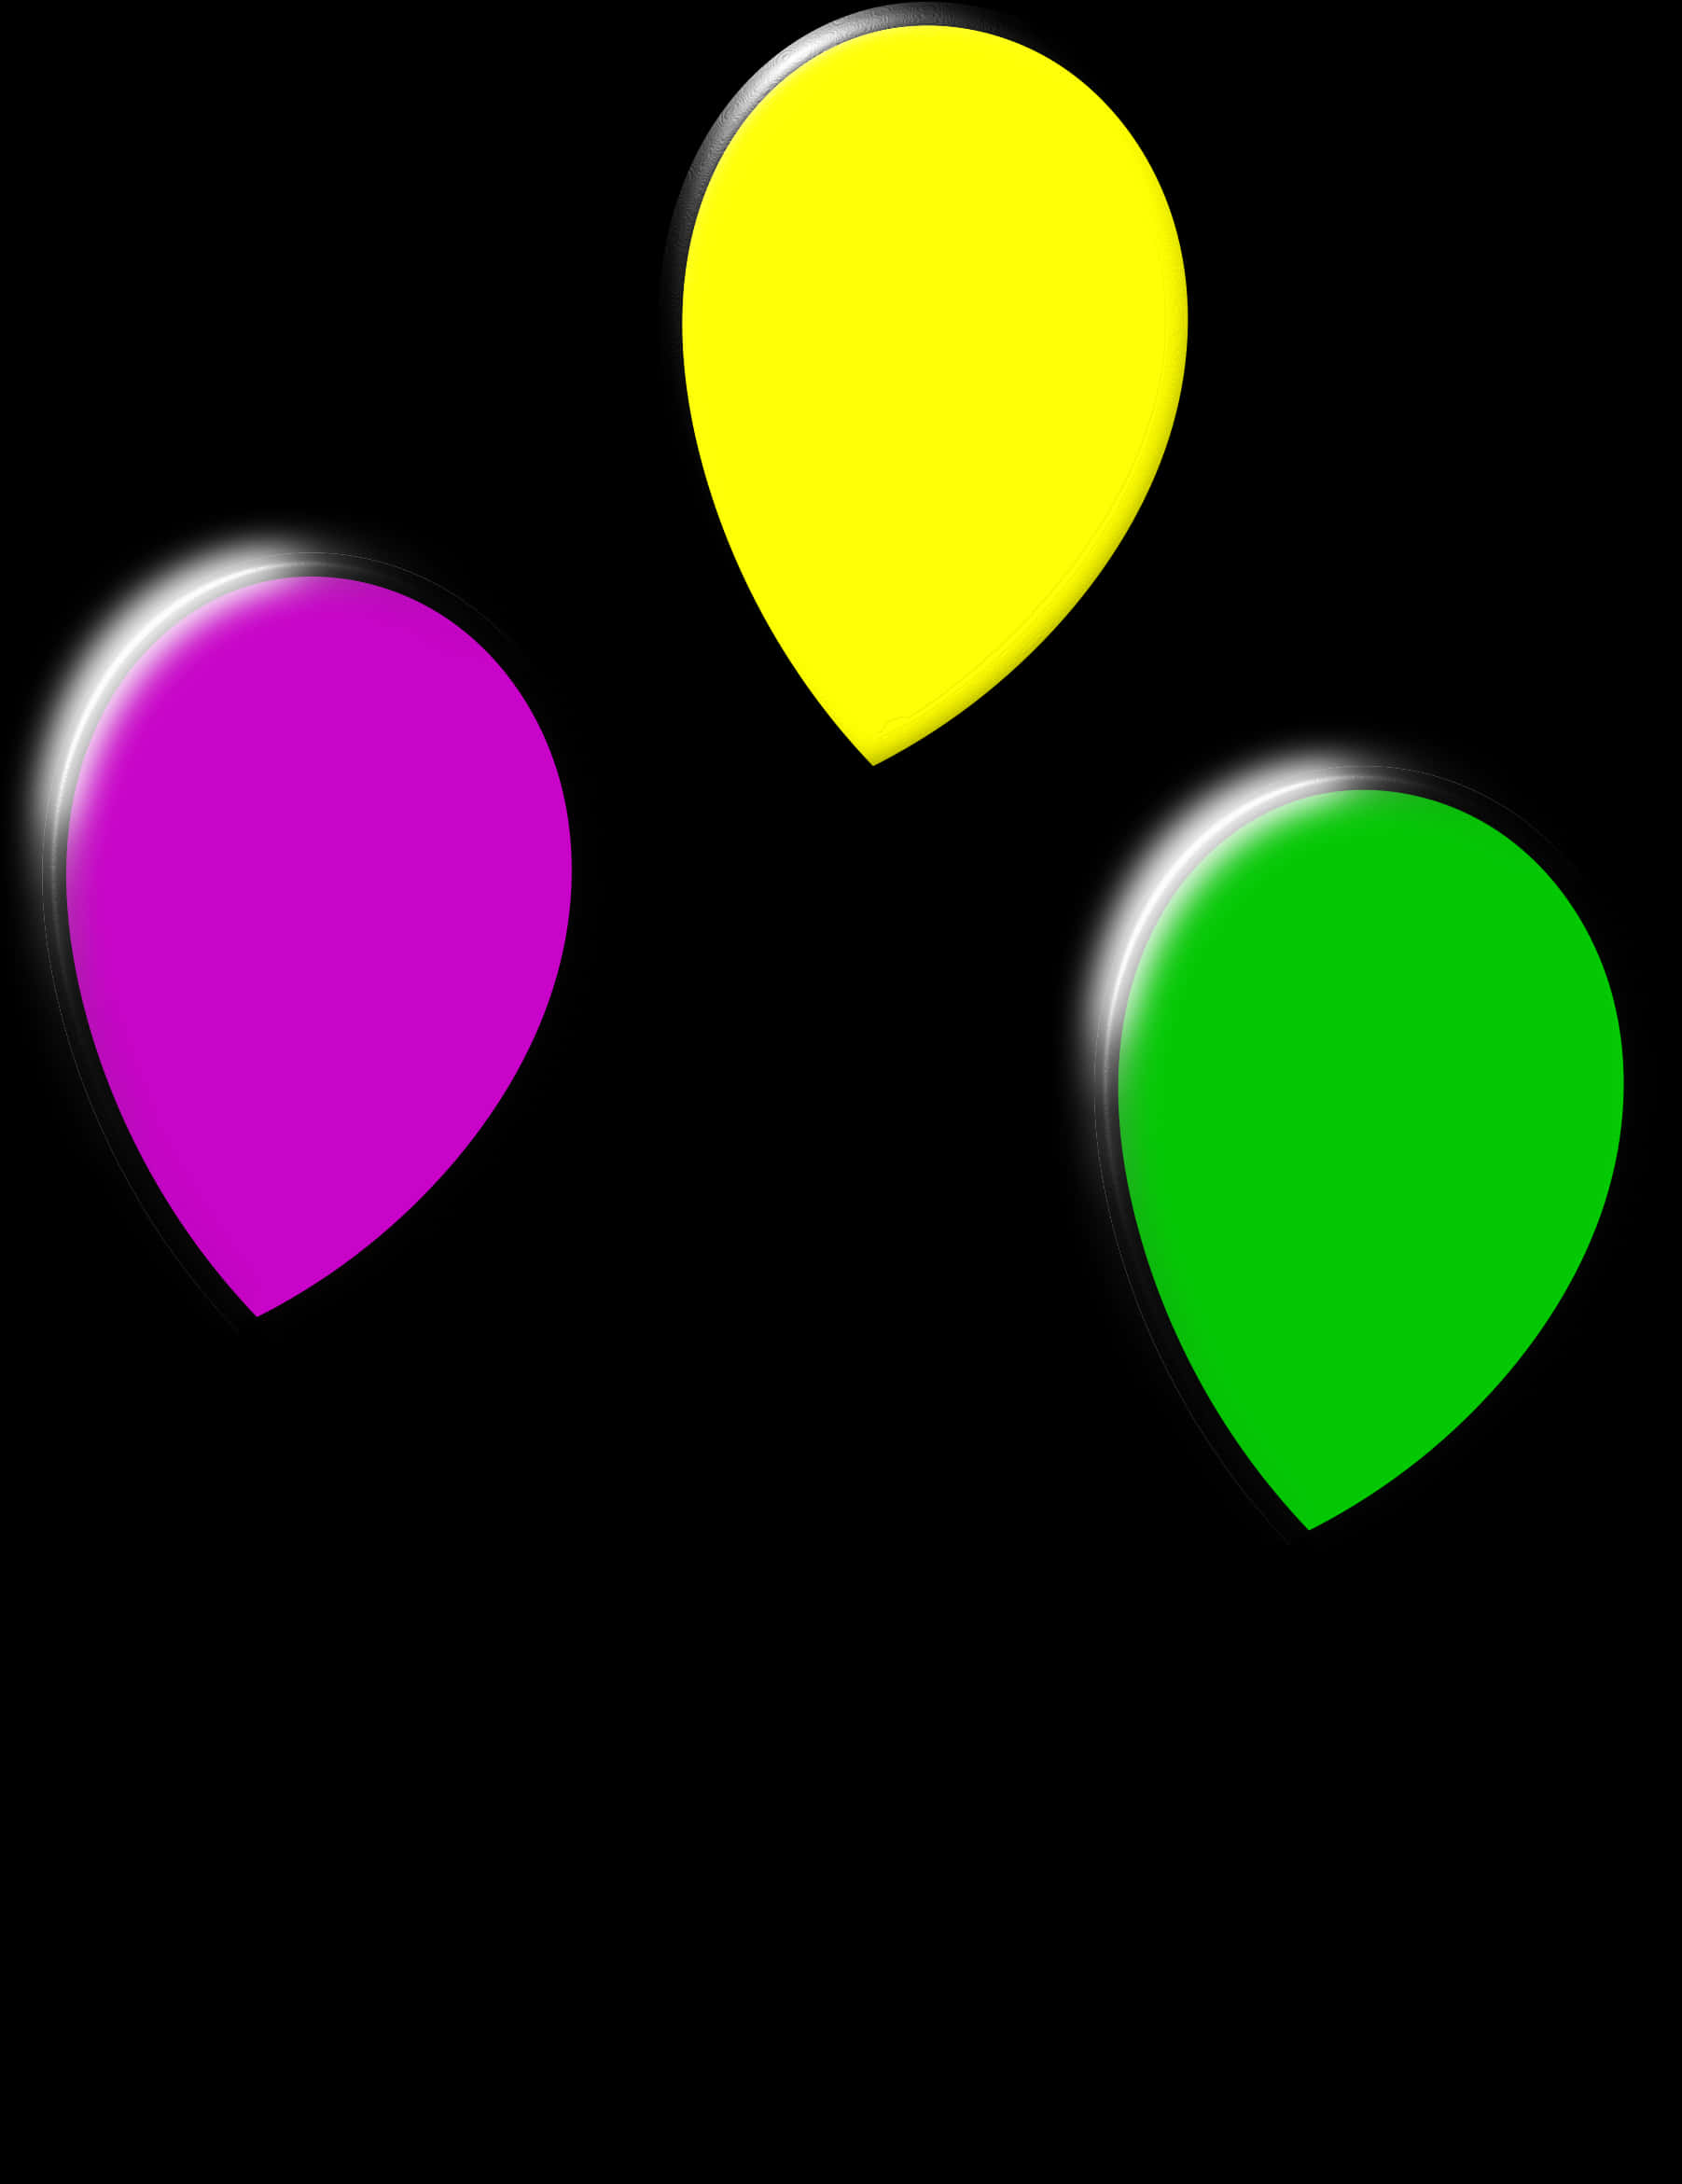 A Group Of Colorful Balloons